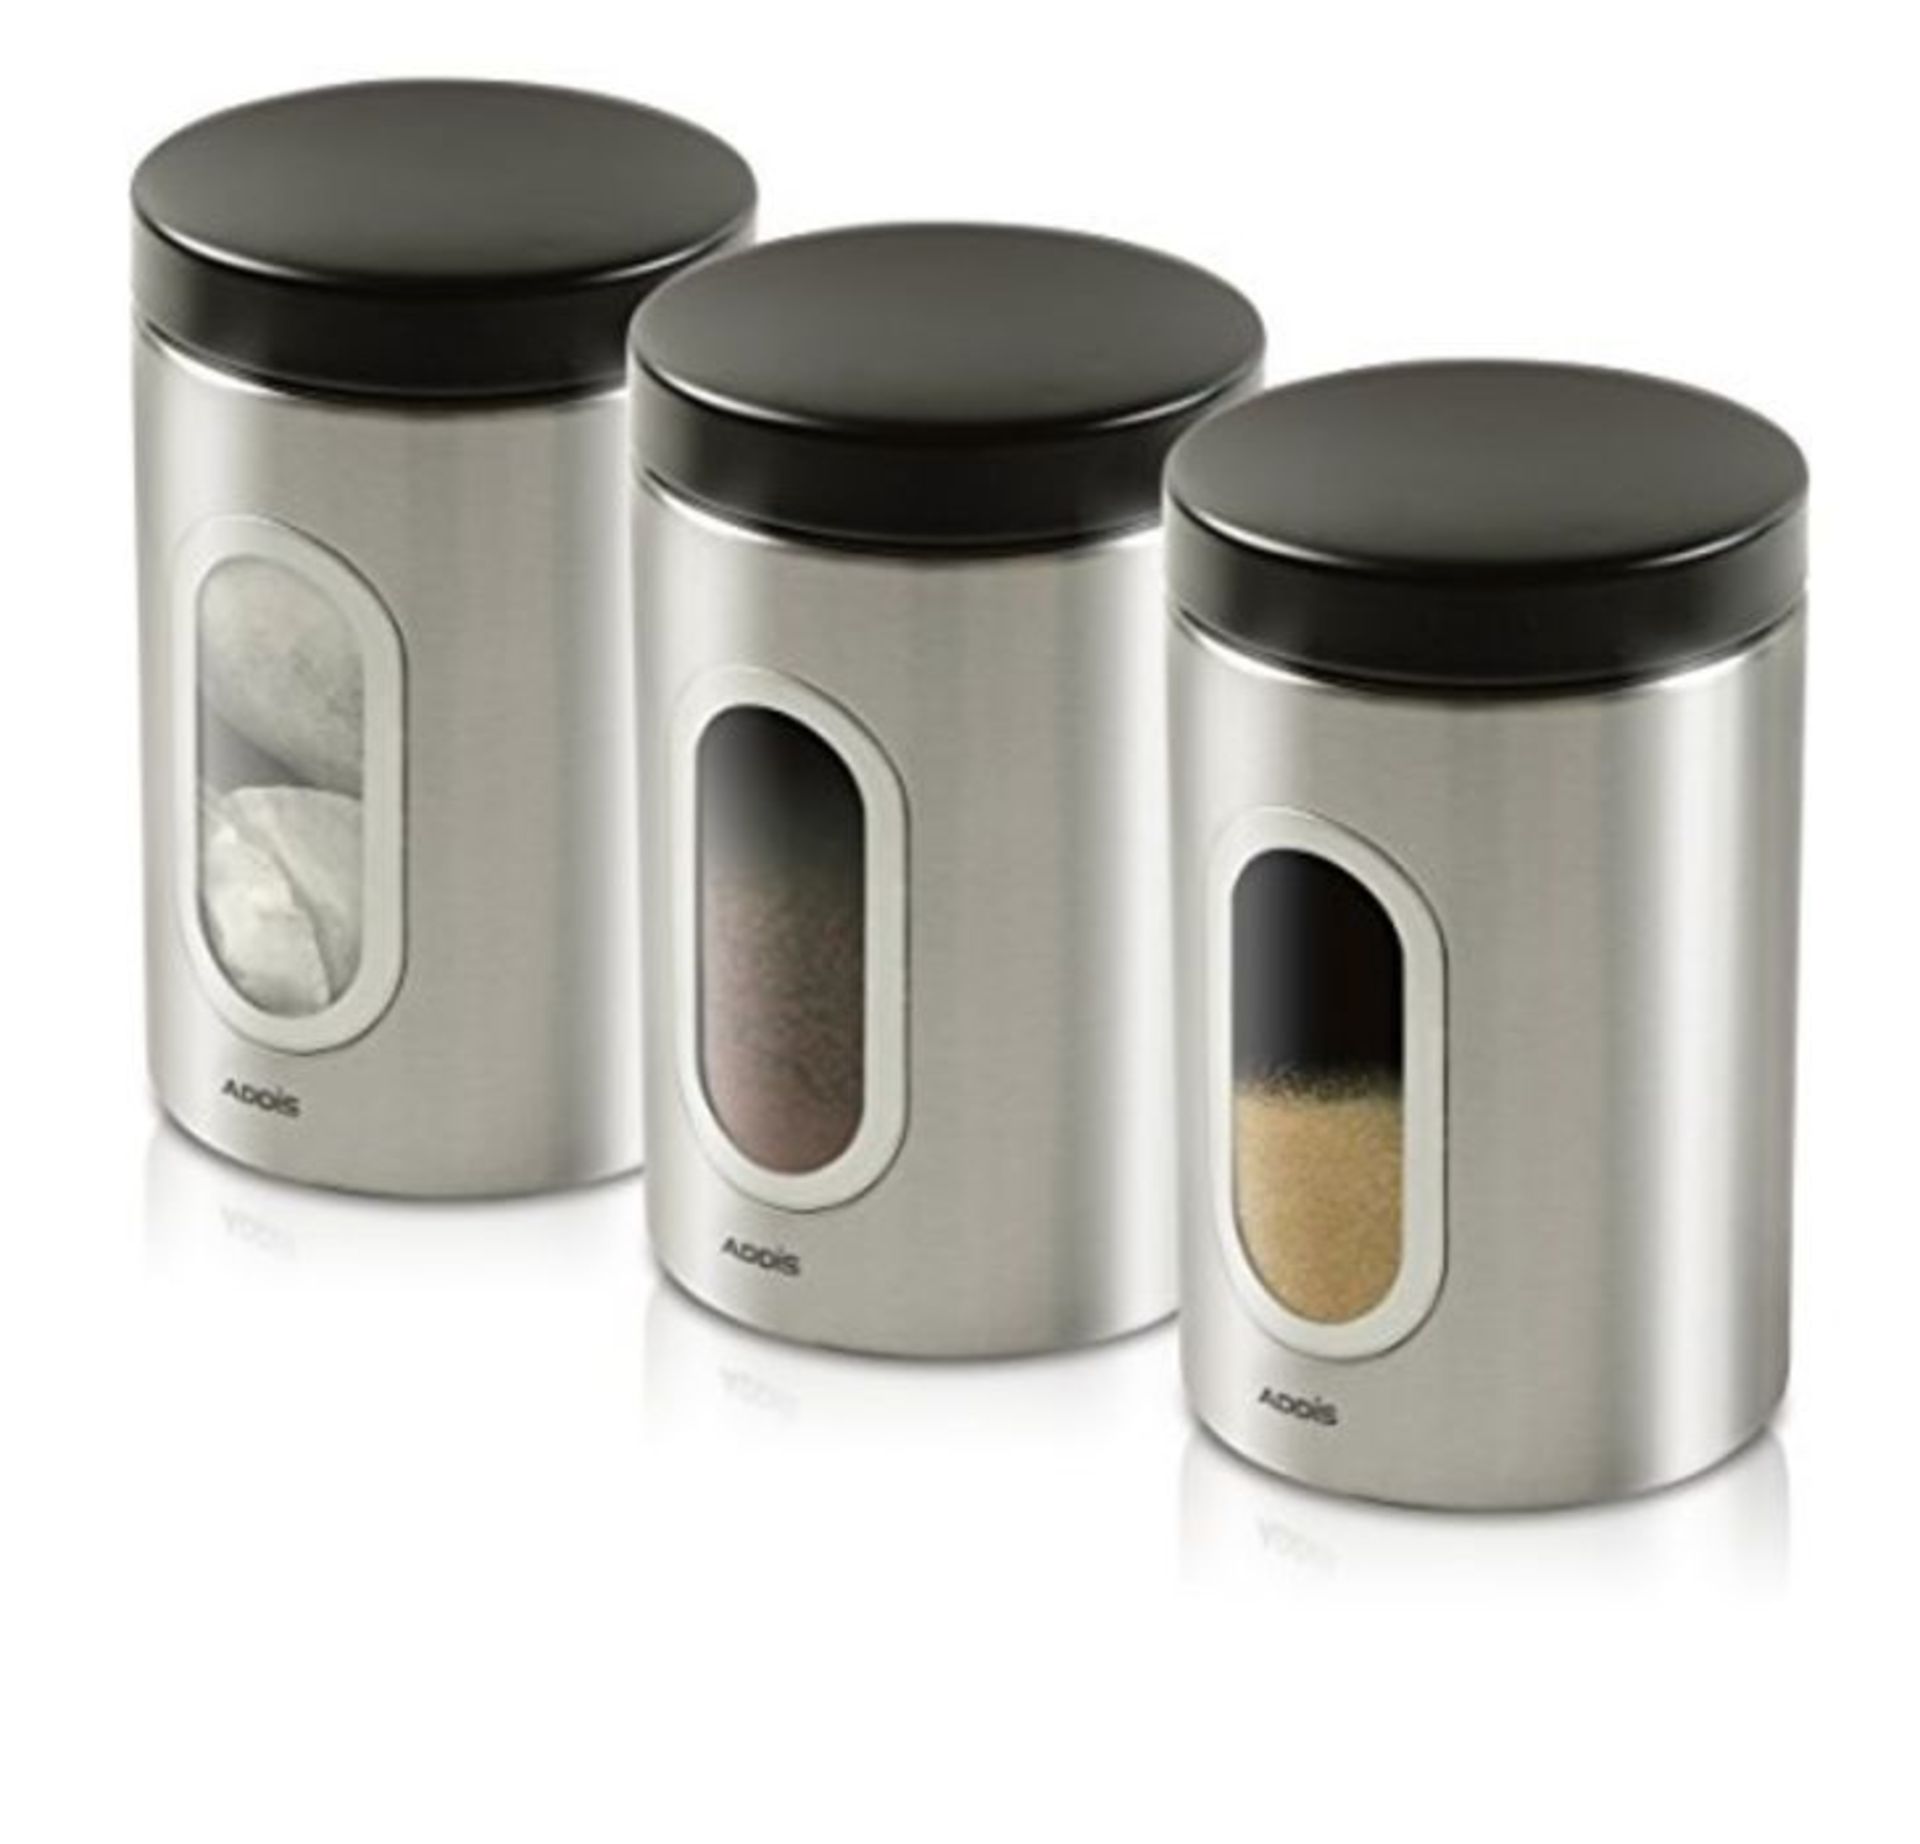 Addis 508453 Deluxe 3 Pack Canisters-Stainless Steel, 1.4L